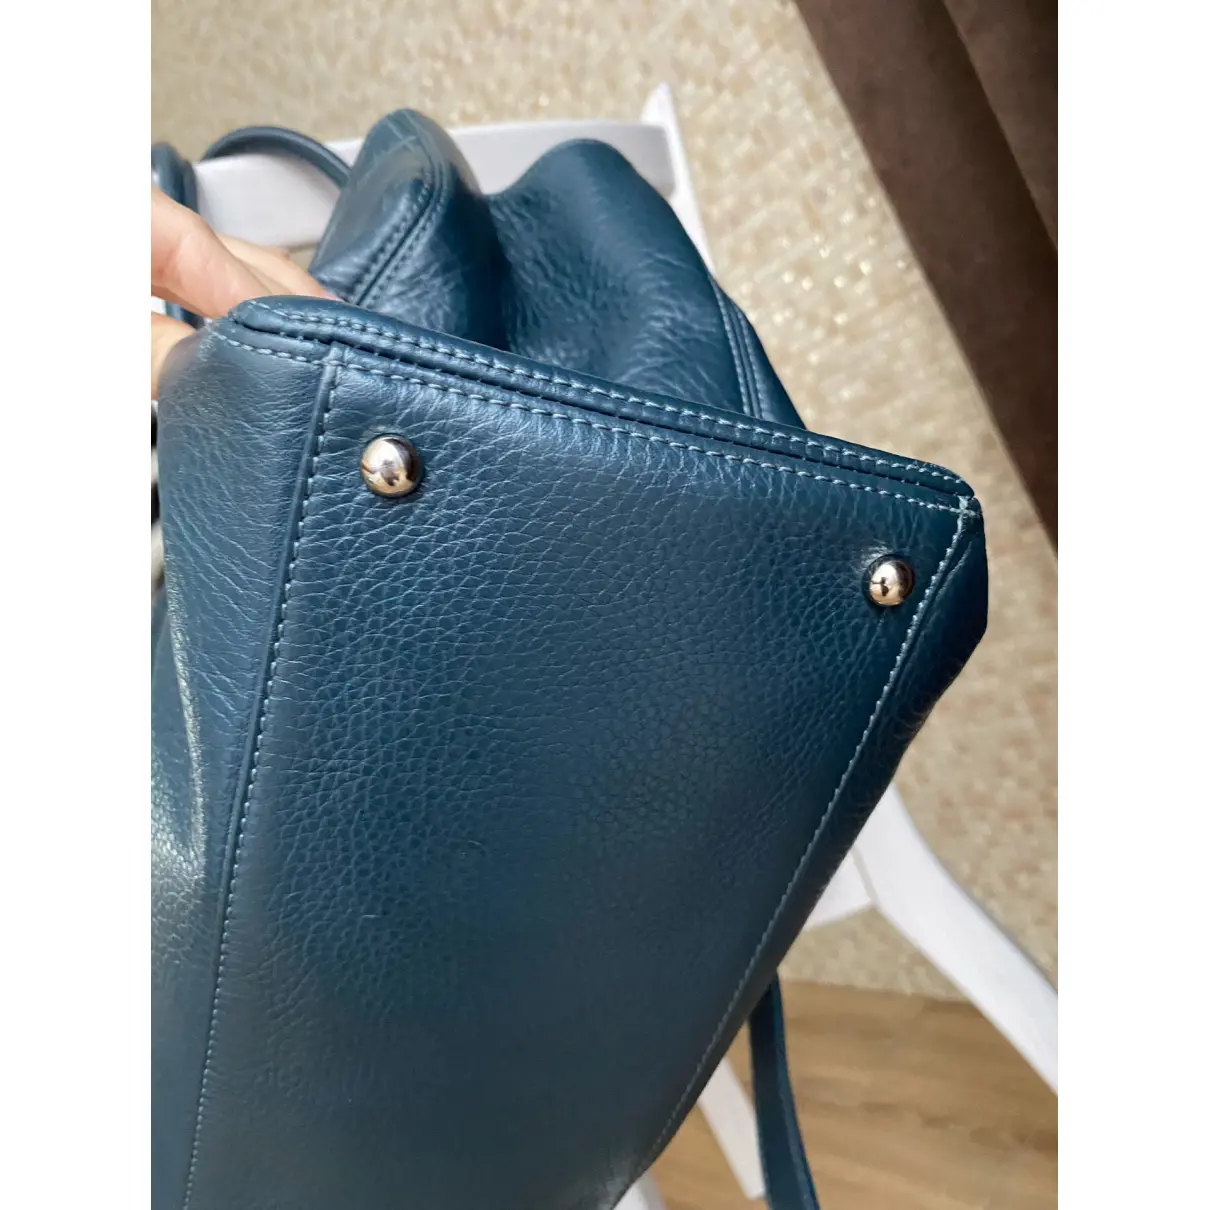 Executive leather tote Chanel